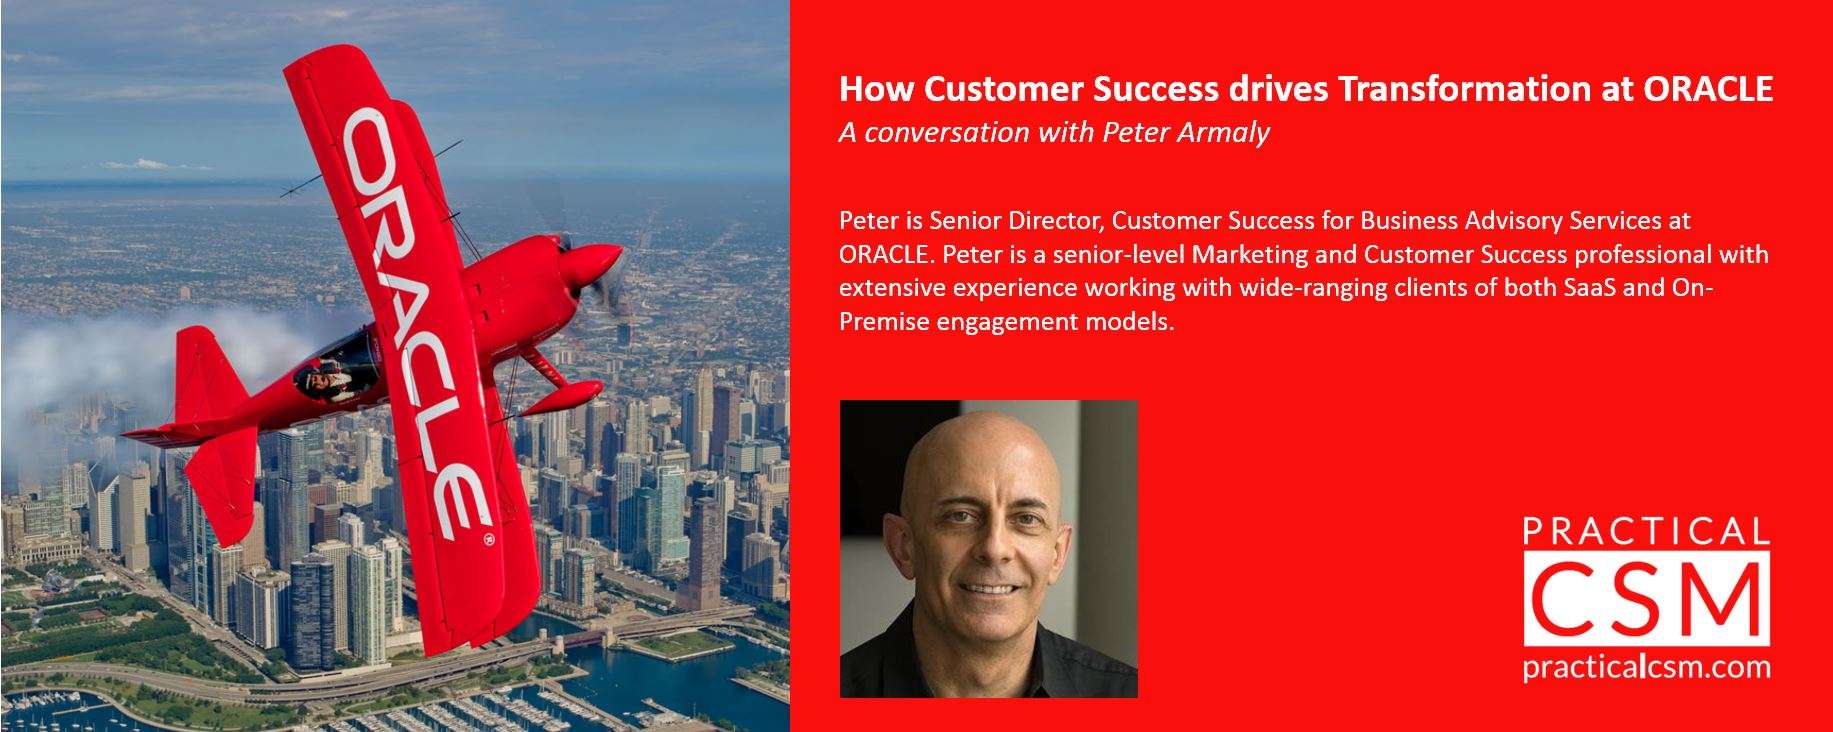 How Customer Success drives Transformation in ORACLE with Peter Armaly - Practical CSM